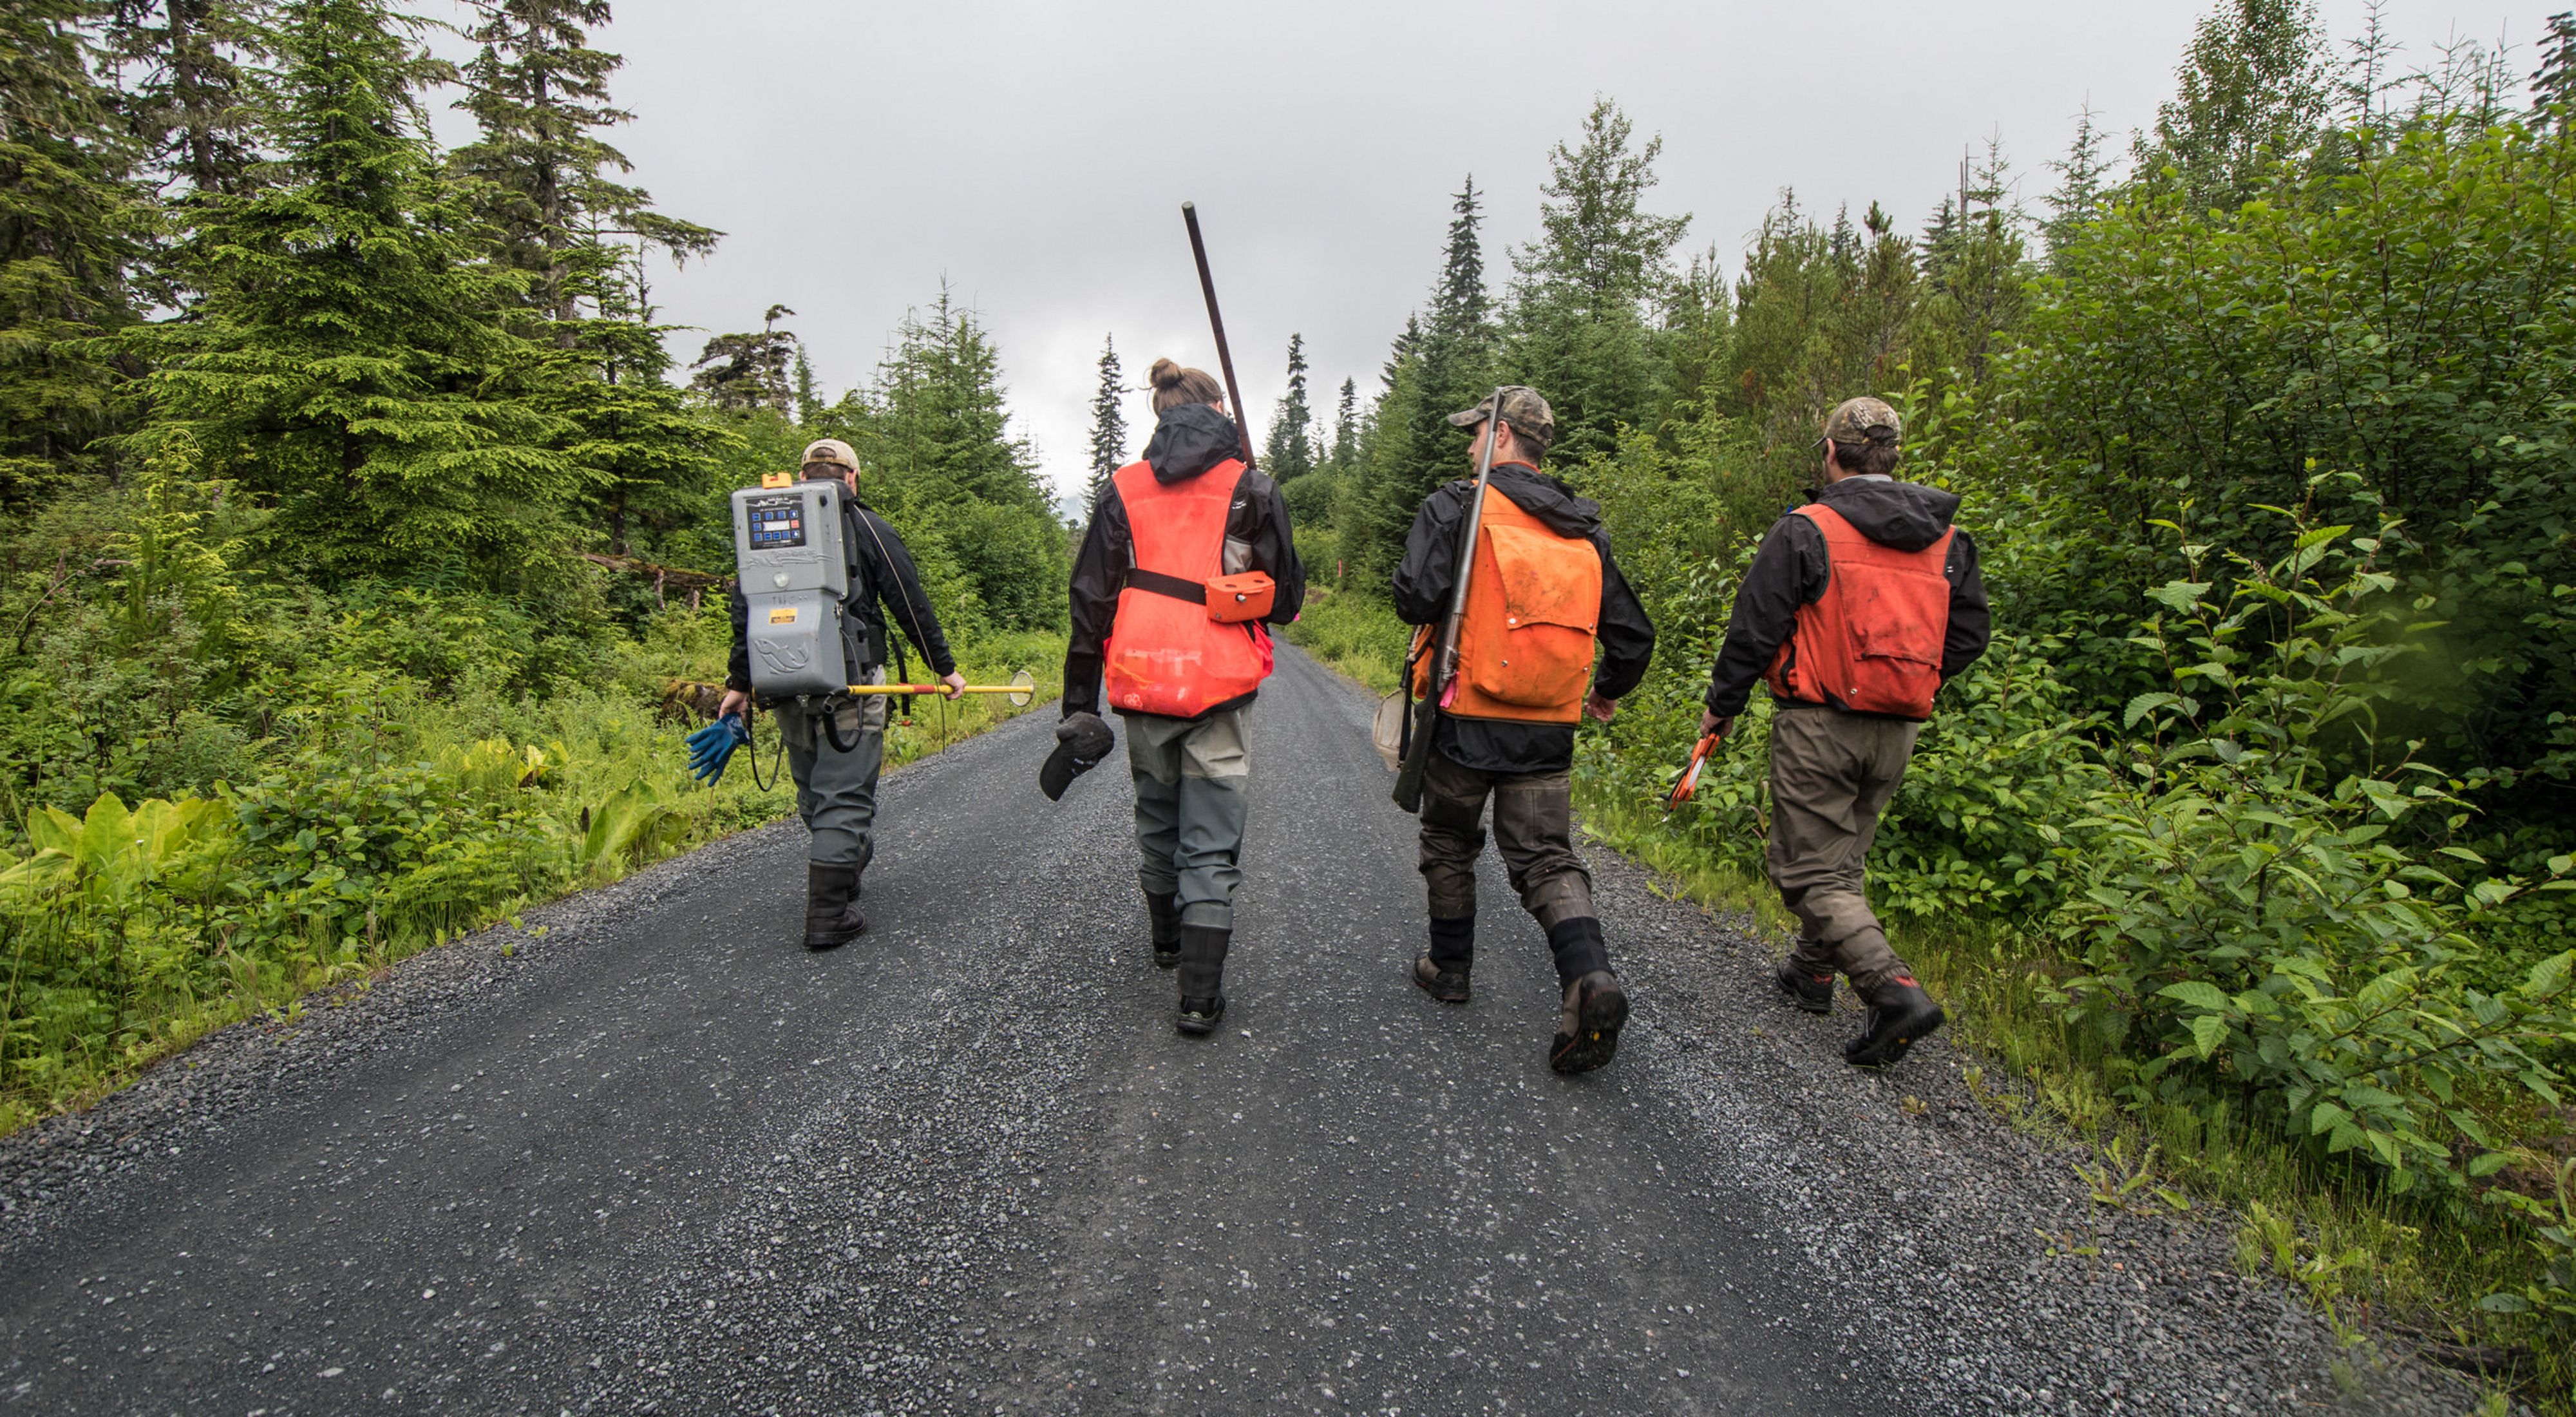 Four members of the Hoonah Native Forest Partnership field crew wear orange vests and carry equipment as they walk down a dirt road in a forest.